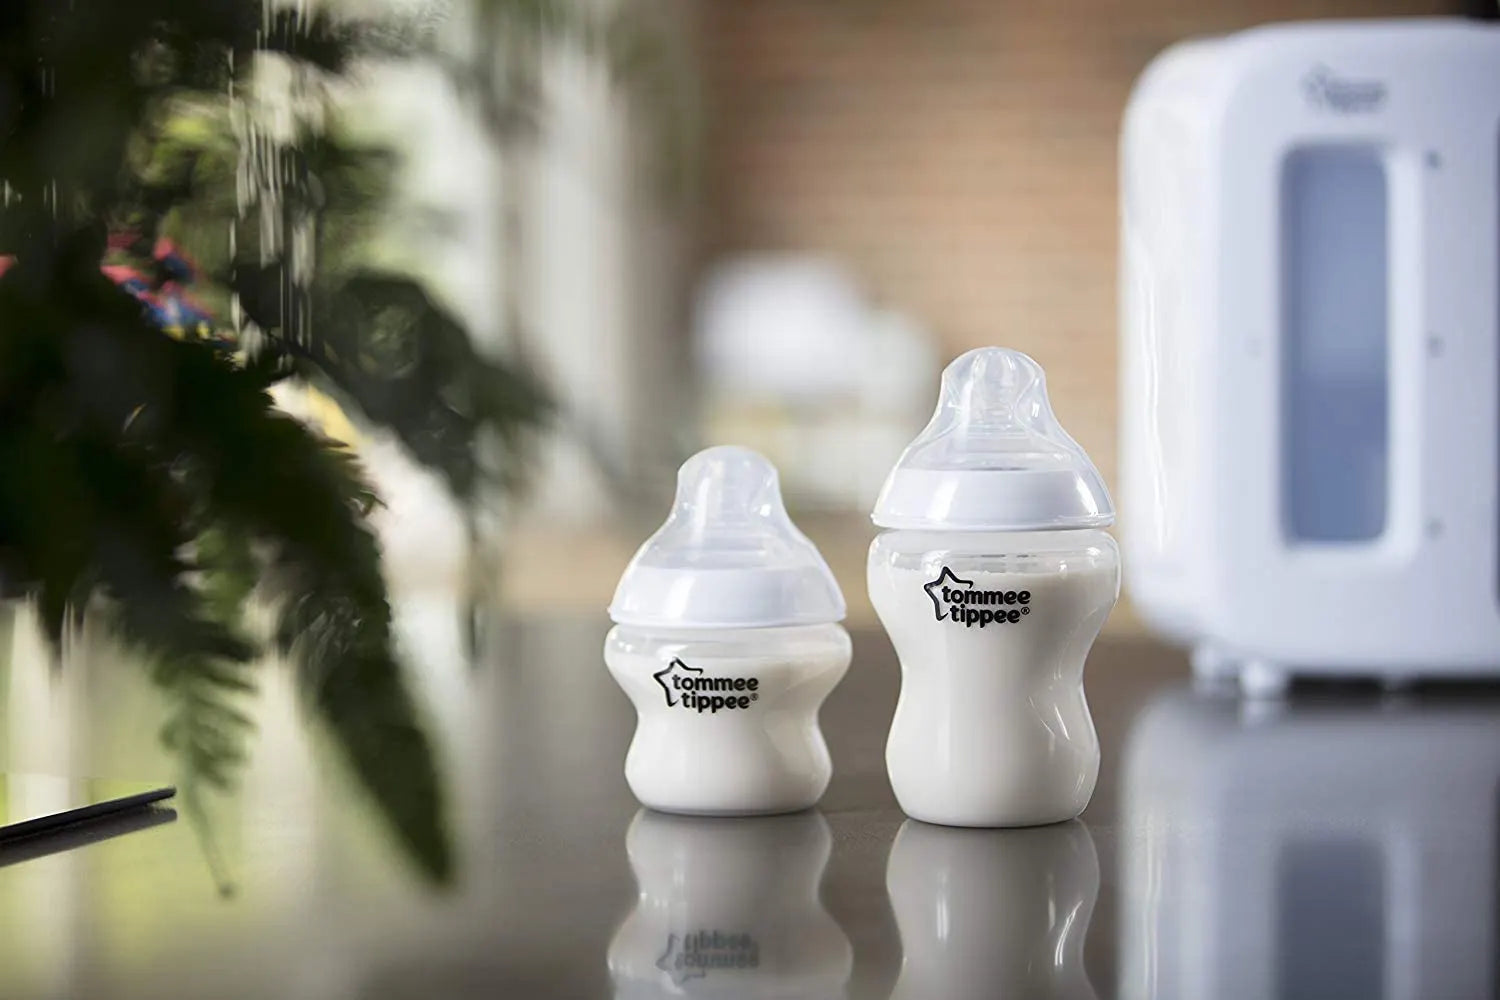 Tommee Tippee Closer To Nature Feeding Bottle, 150Ml X 3 (Clear)